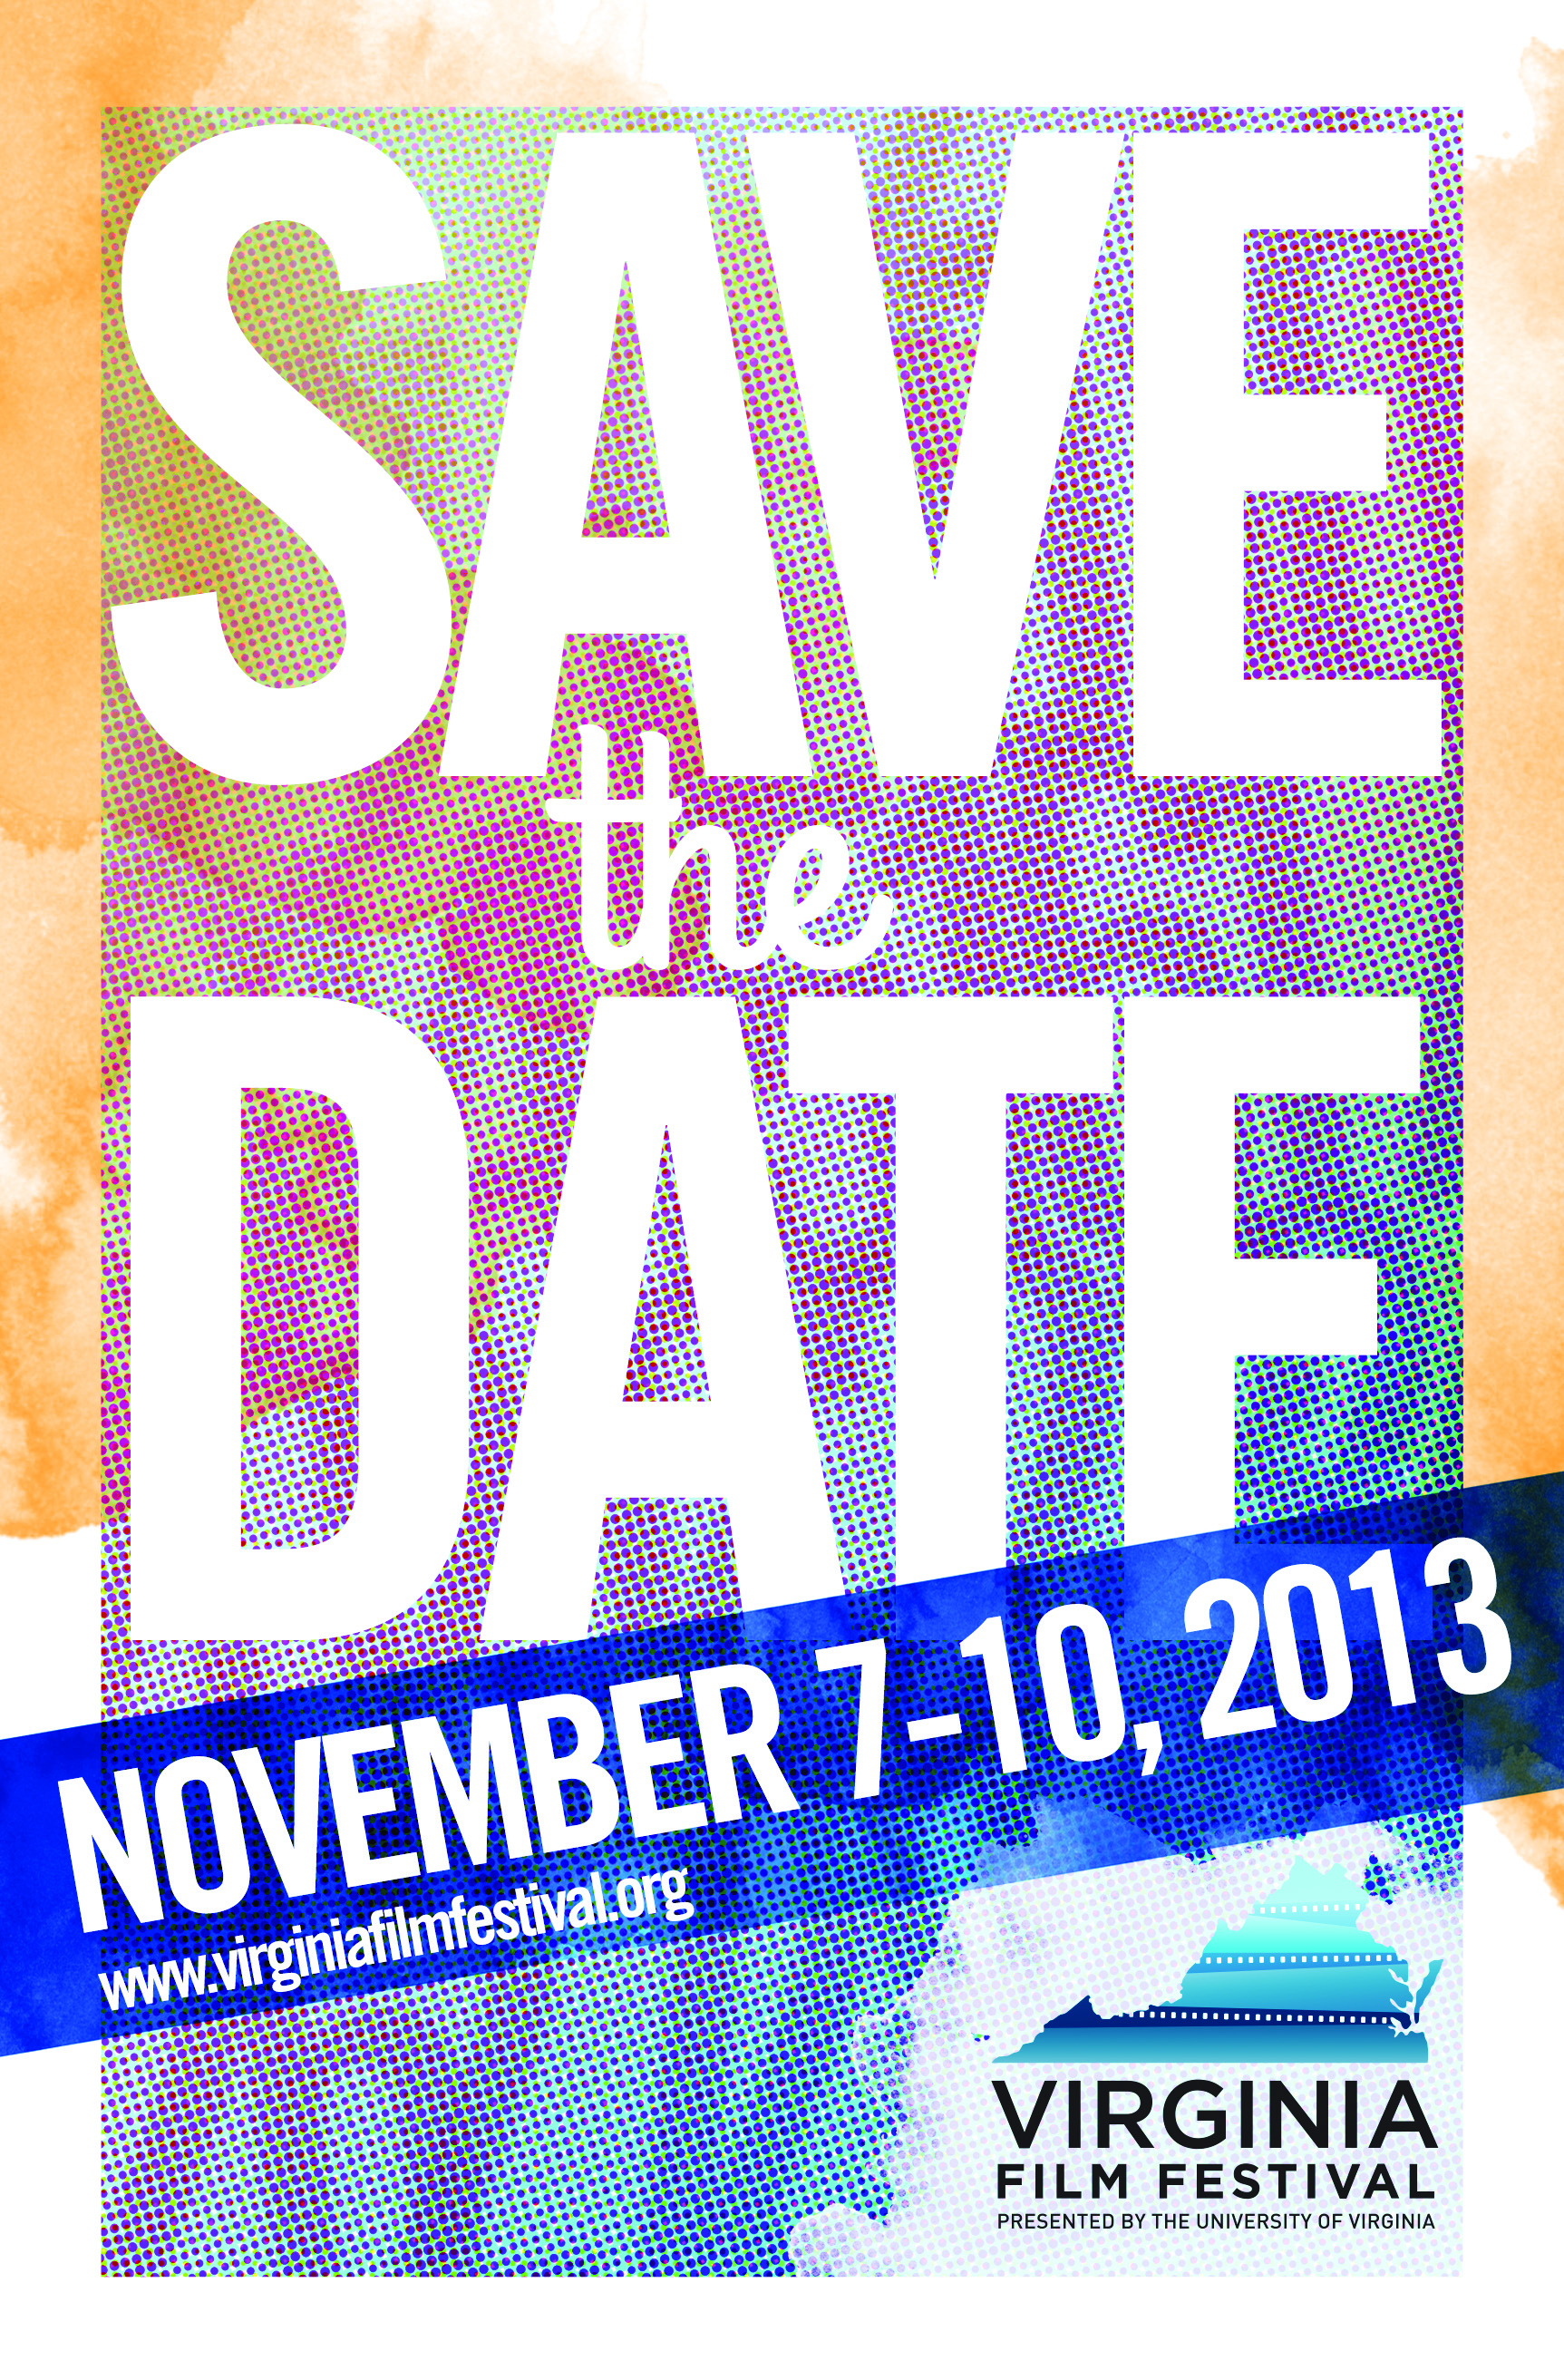 Text reads: Save the date November 7-10 2013